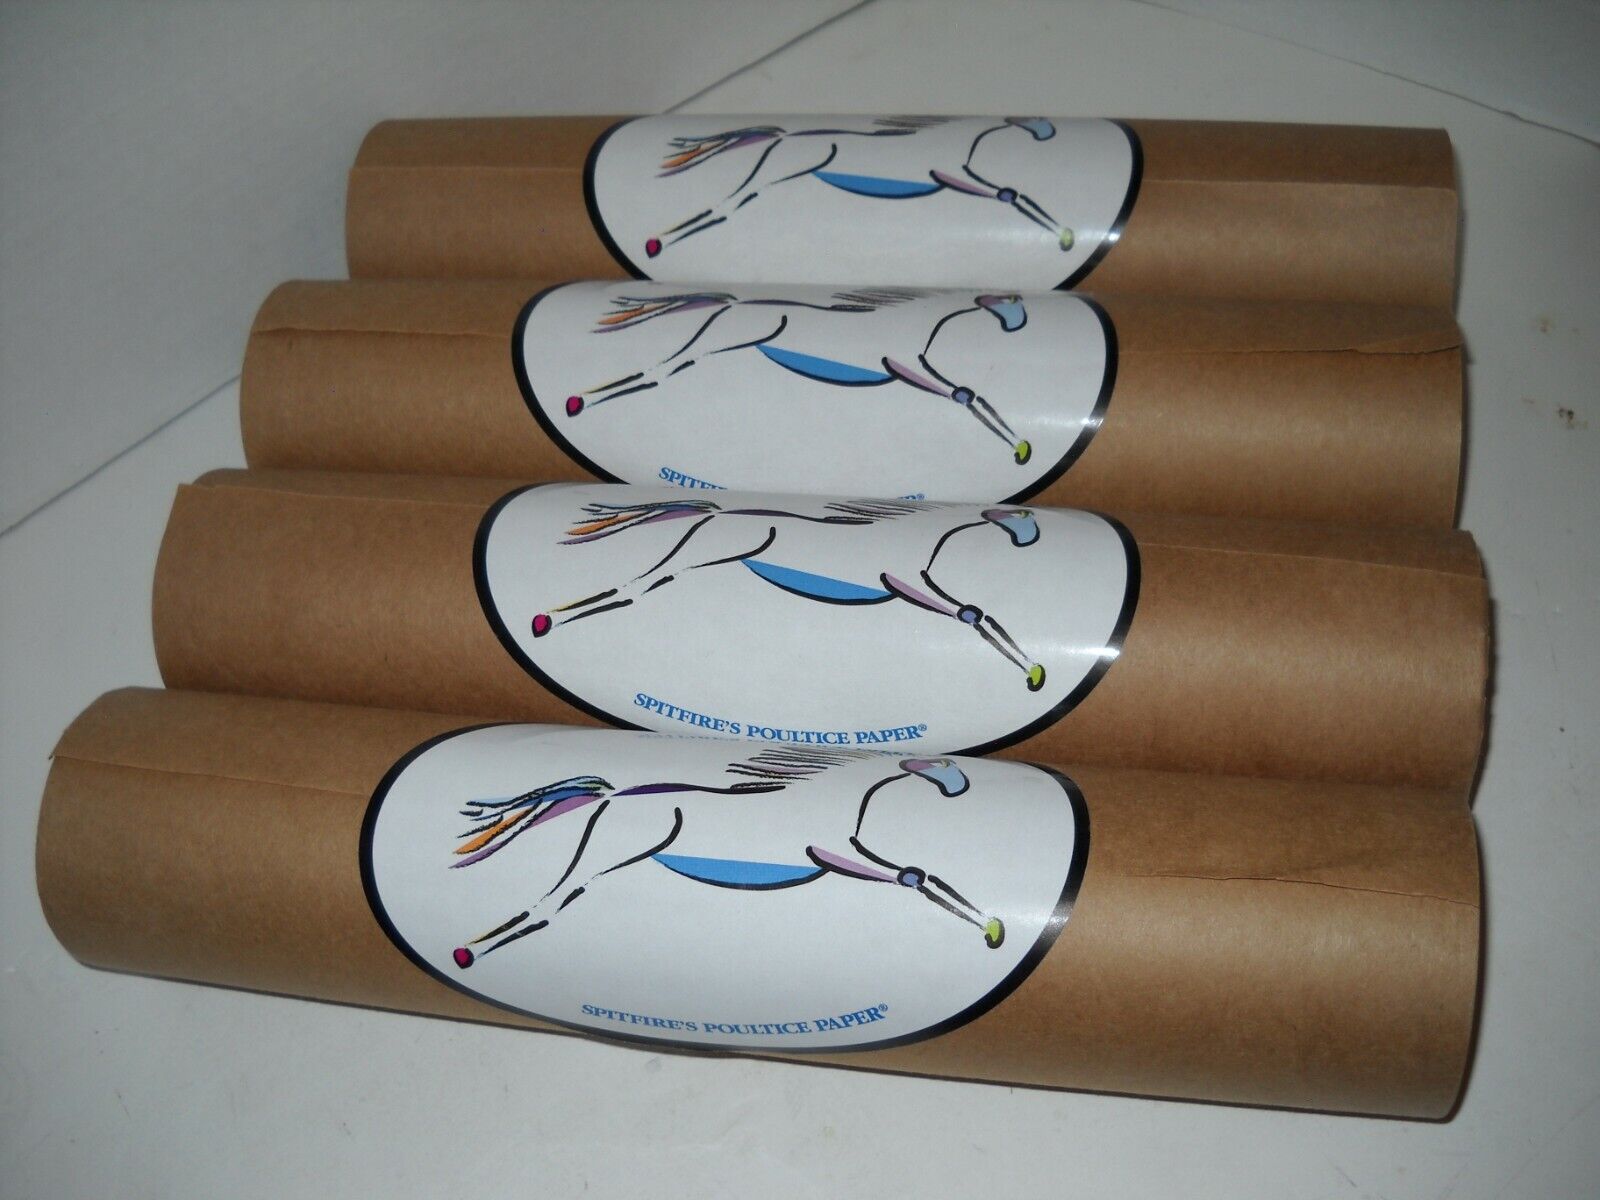 Spitfires Poultice Paper Roll, 12" x 75', safe for horses, NEW - Lot of 4 rolls Spitfire Does Not Apply